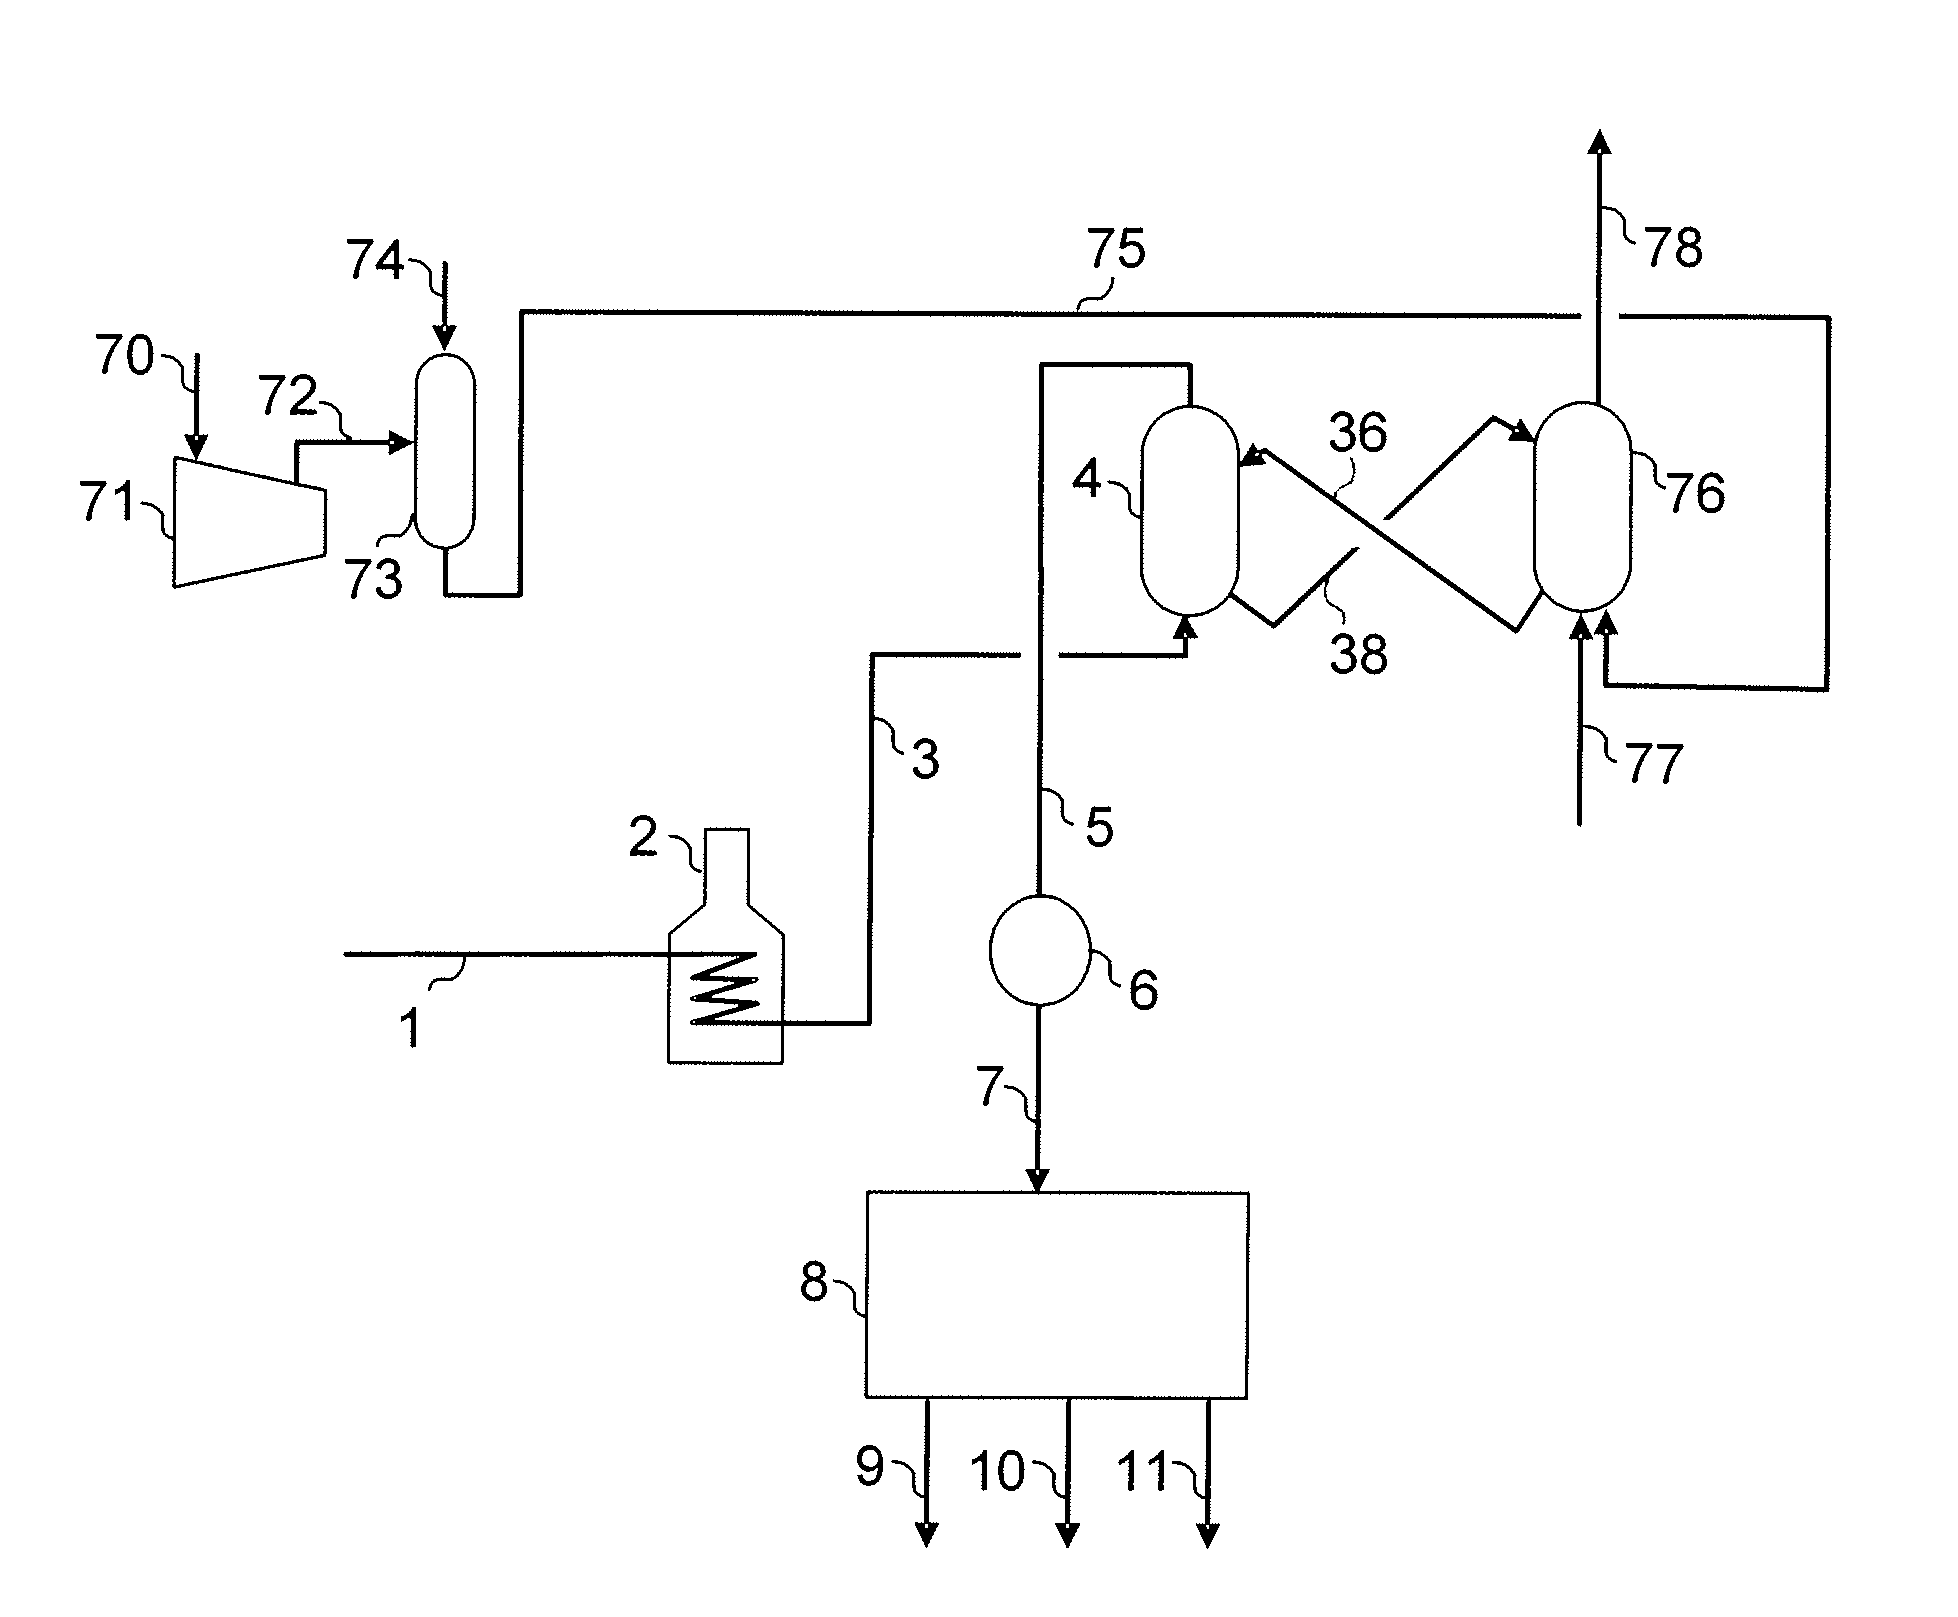 Fluidized Bed Reactor with Back-Mixing for Dehydrogenation of Light Paraffins